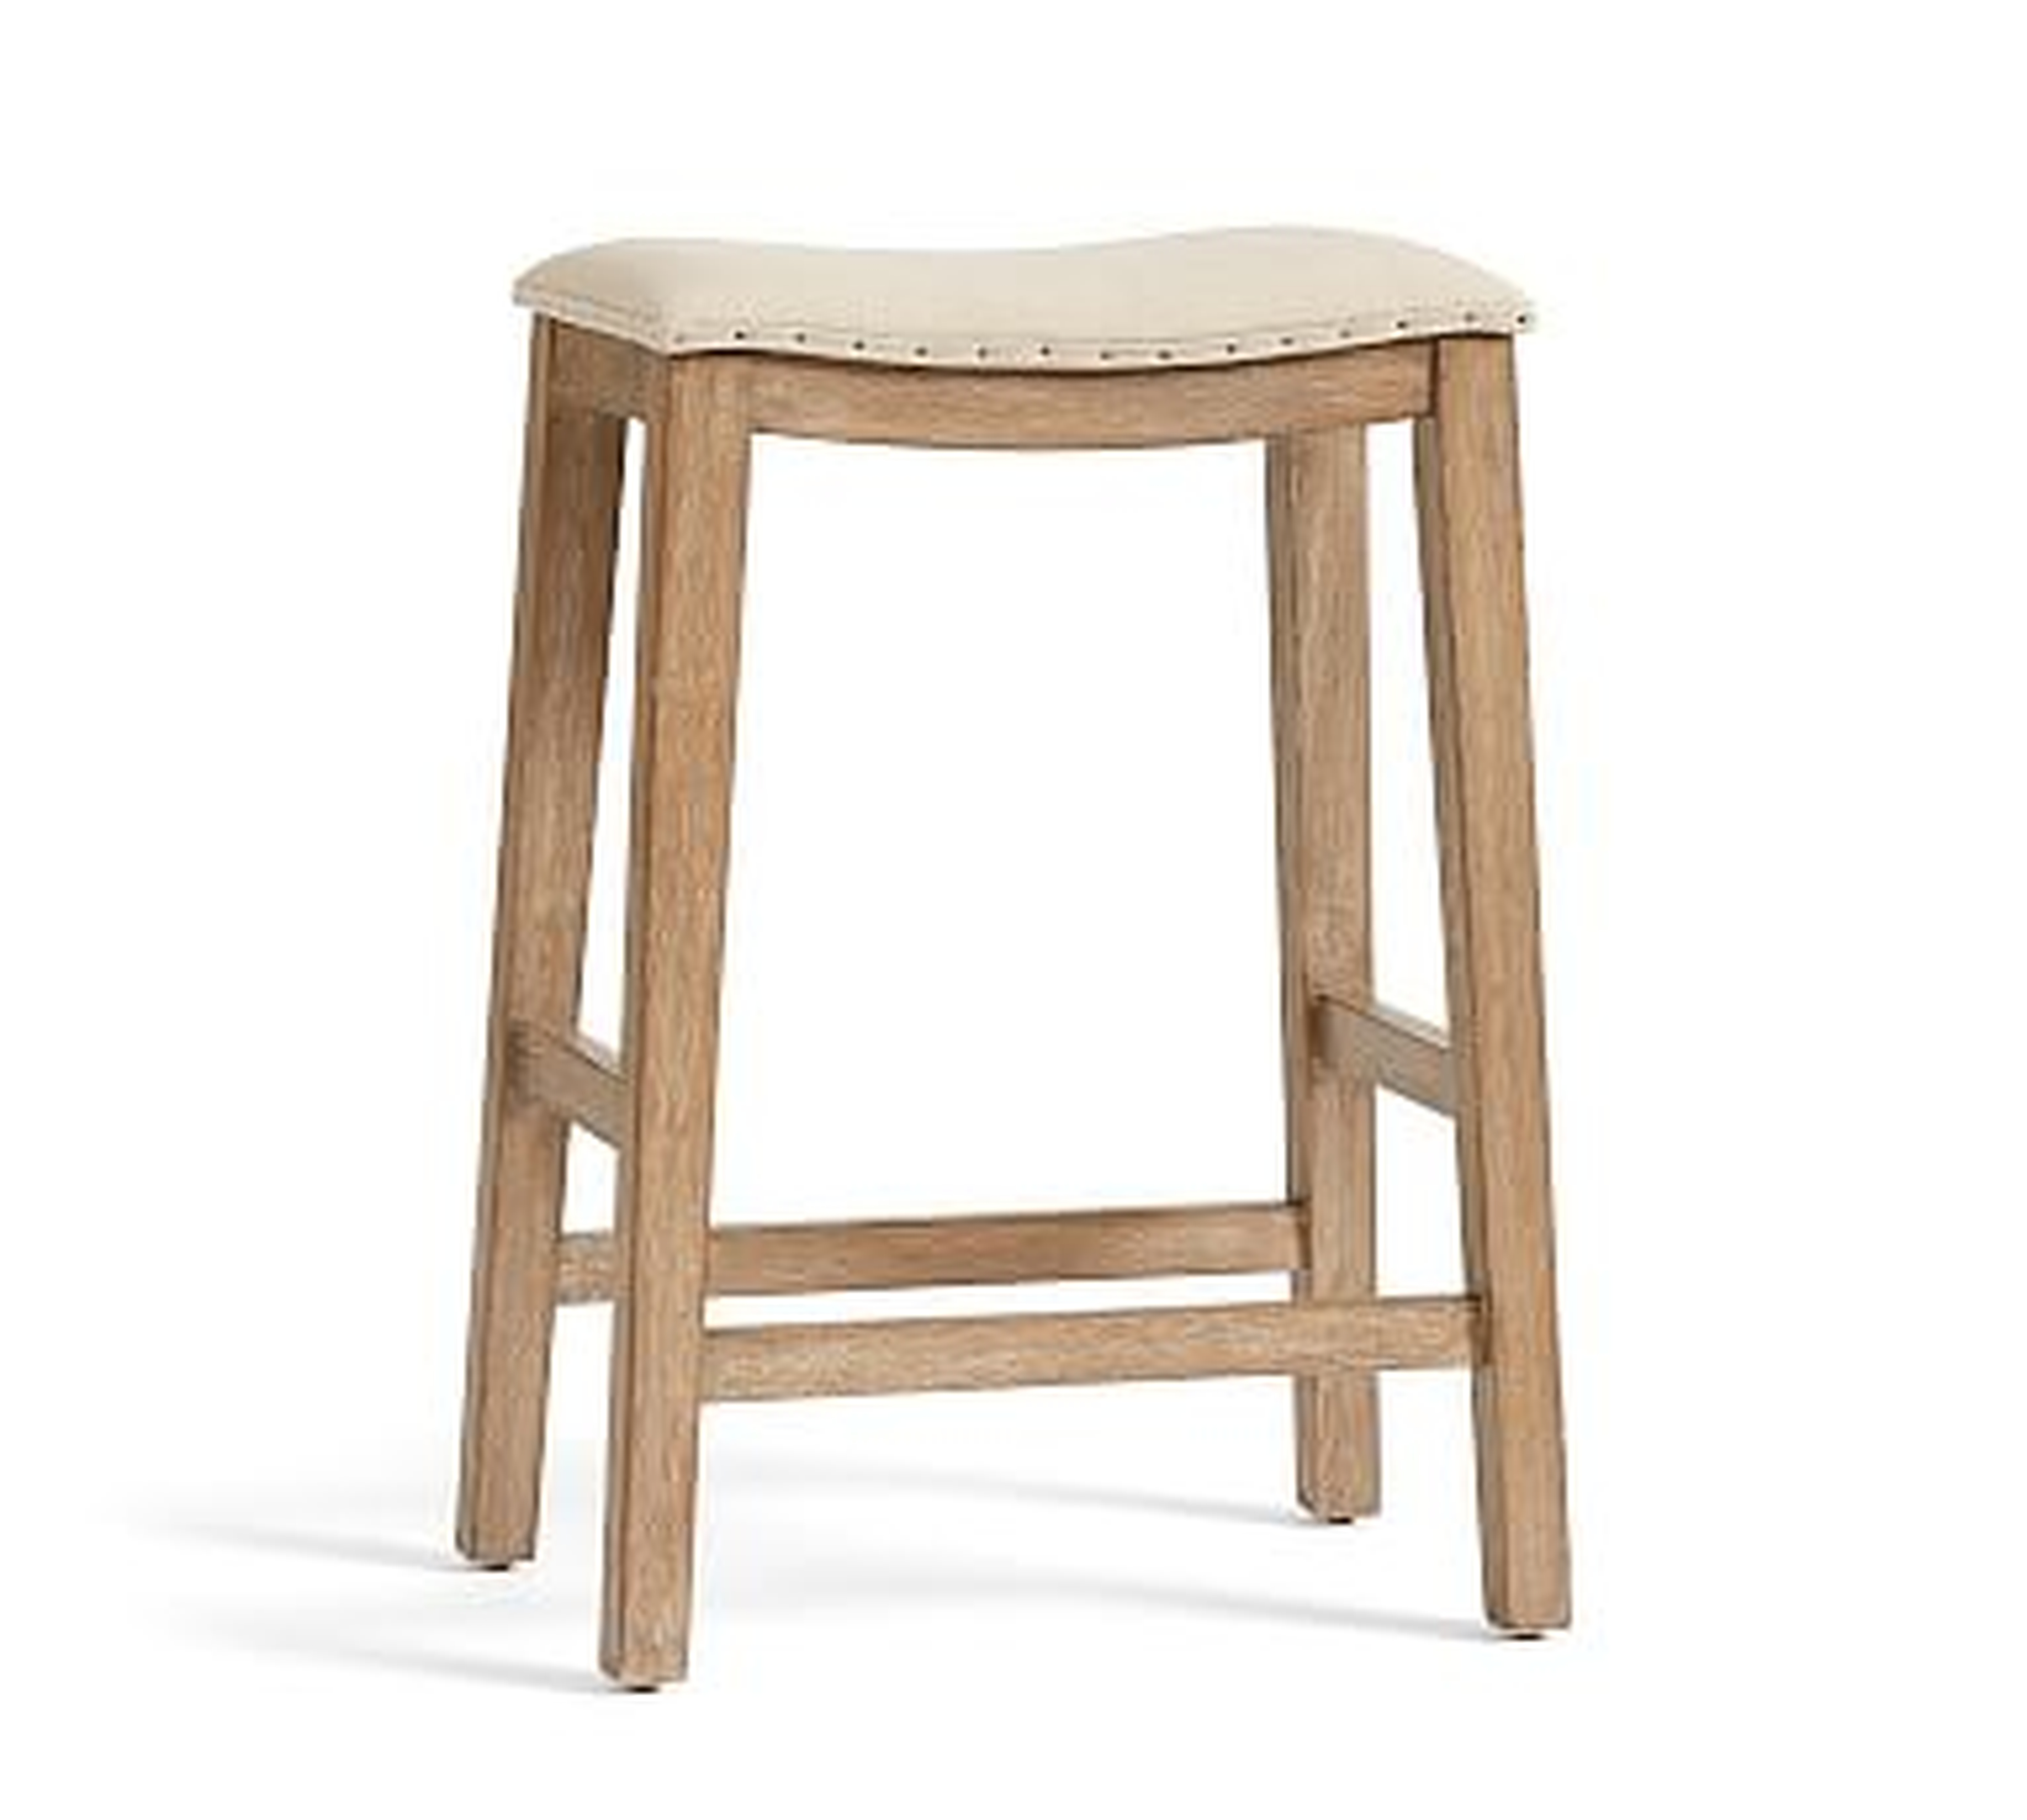 Selma Counter Height Counterstool, Weathered Grey - Pottery Barn